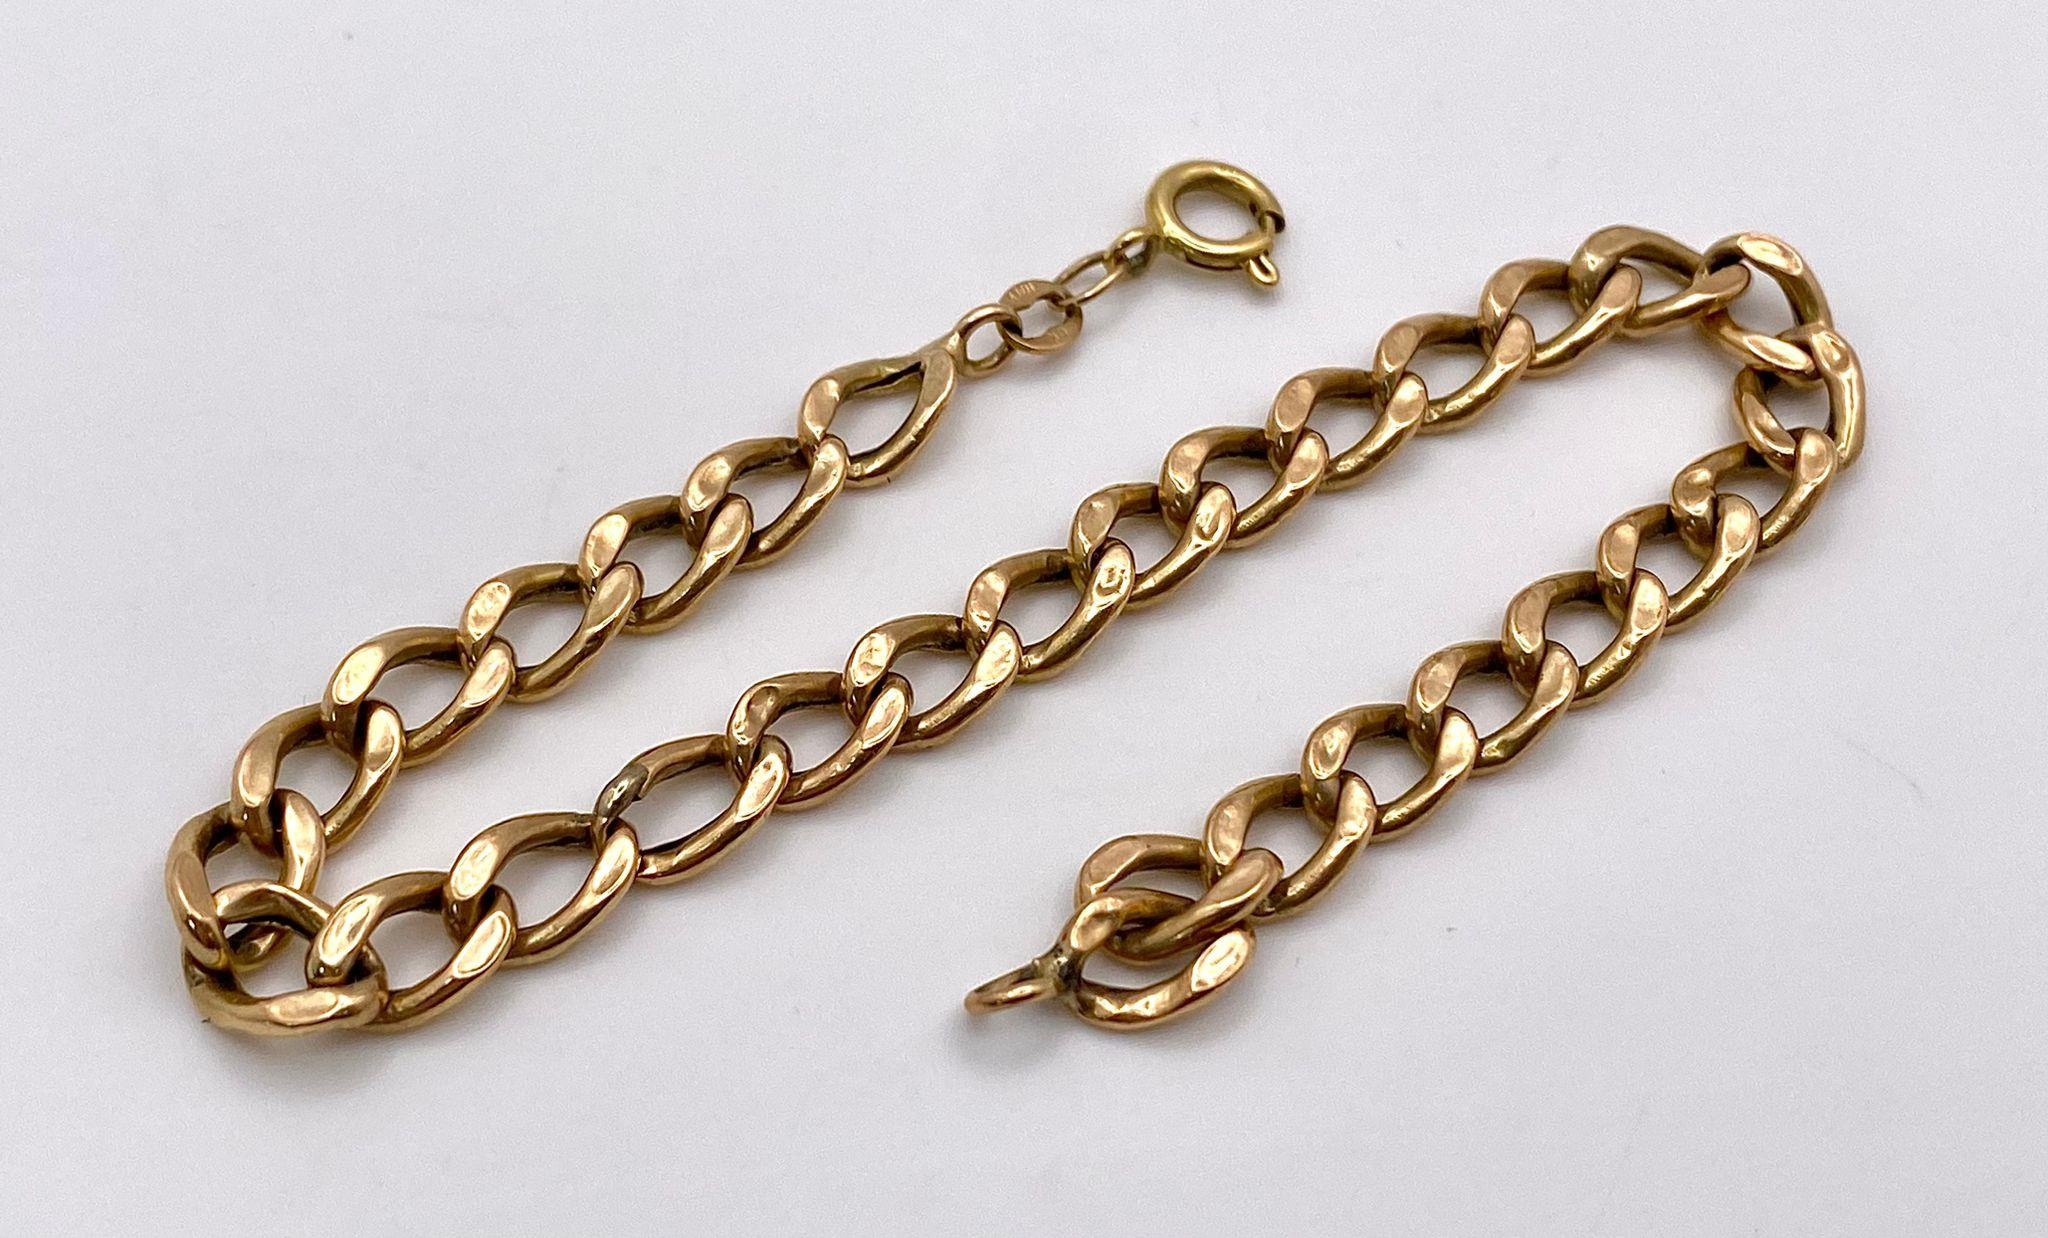 An 18K Yellow Gold Flat Curb Link Bracelet. 19cm. 4.25g weight. - Image 2 of 6